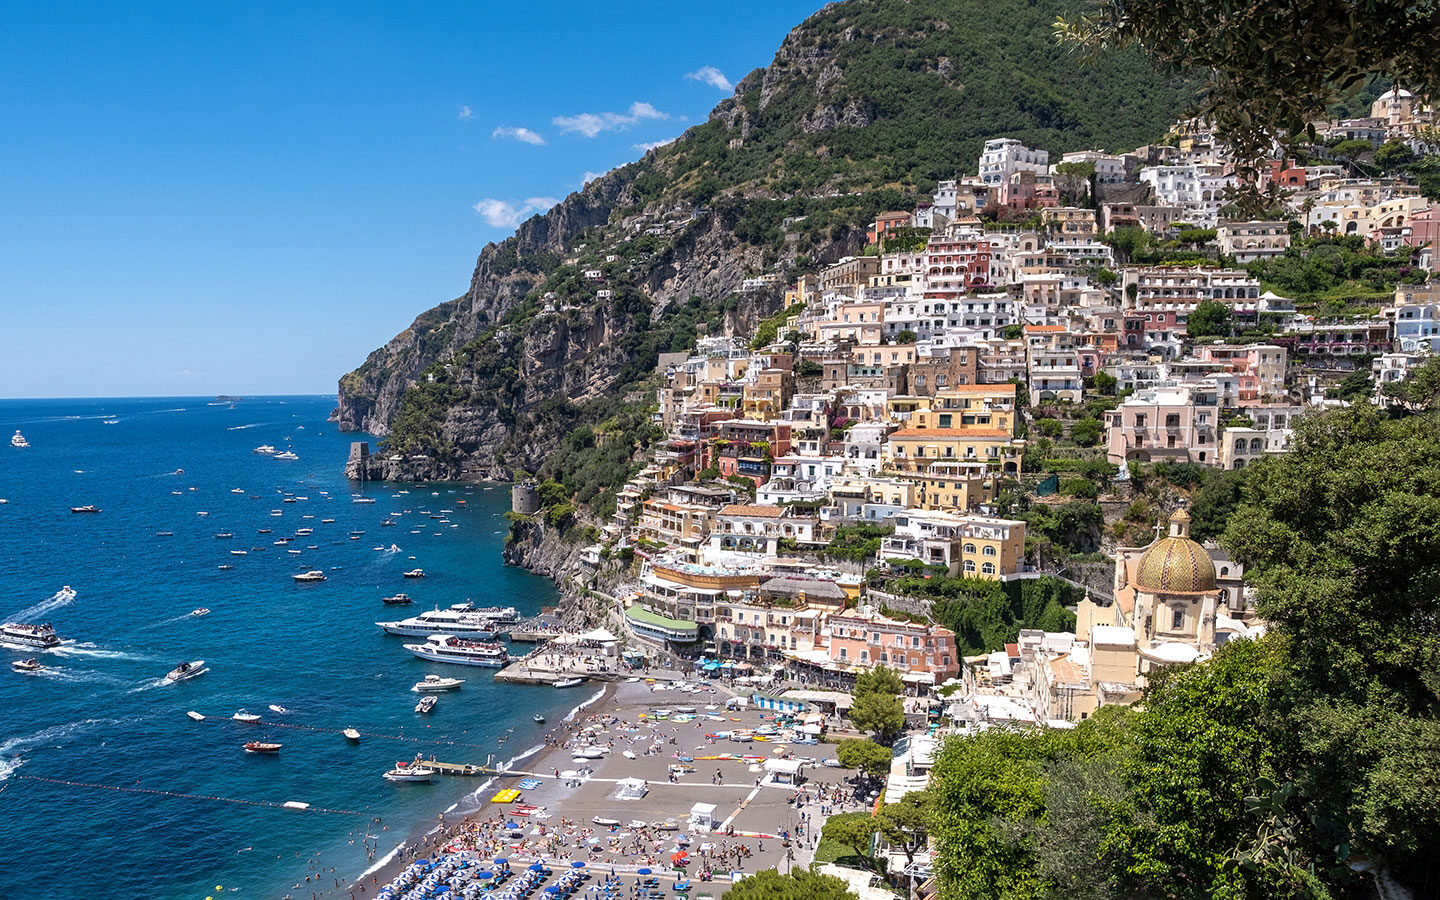 Positano from the steep hills overlooking the town when visiting the Amalfi Coast